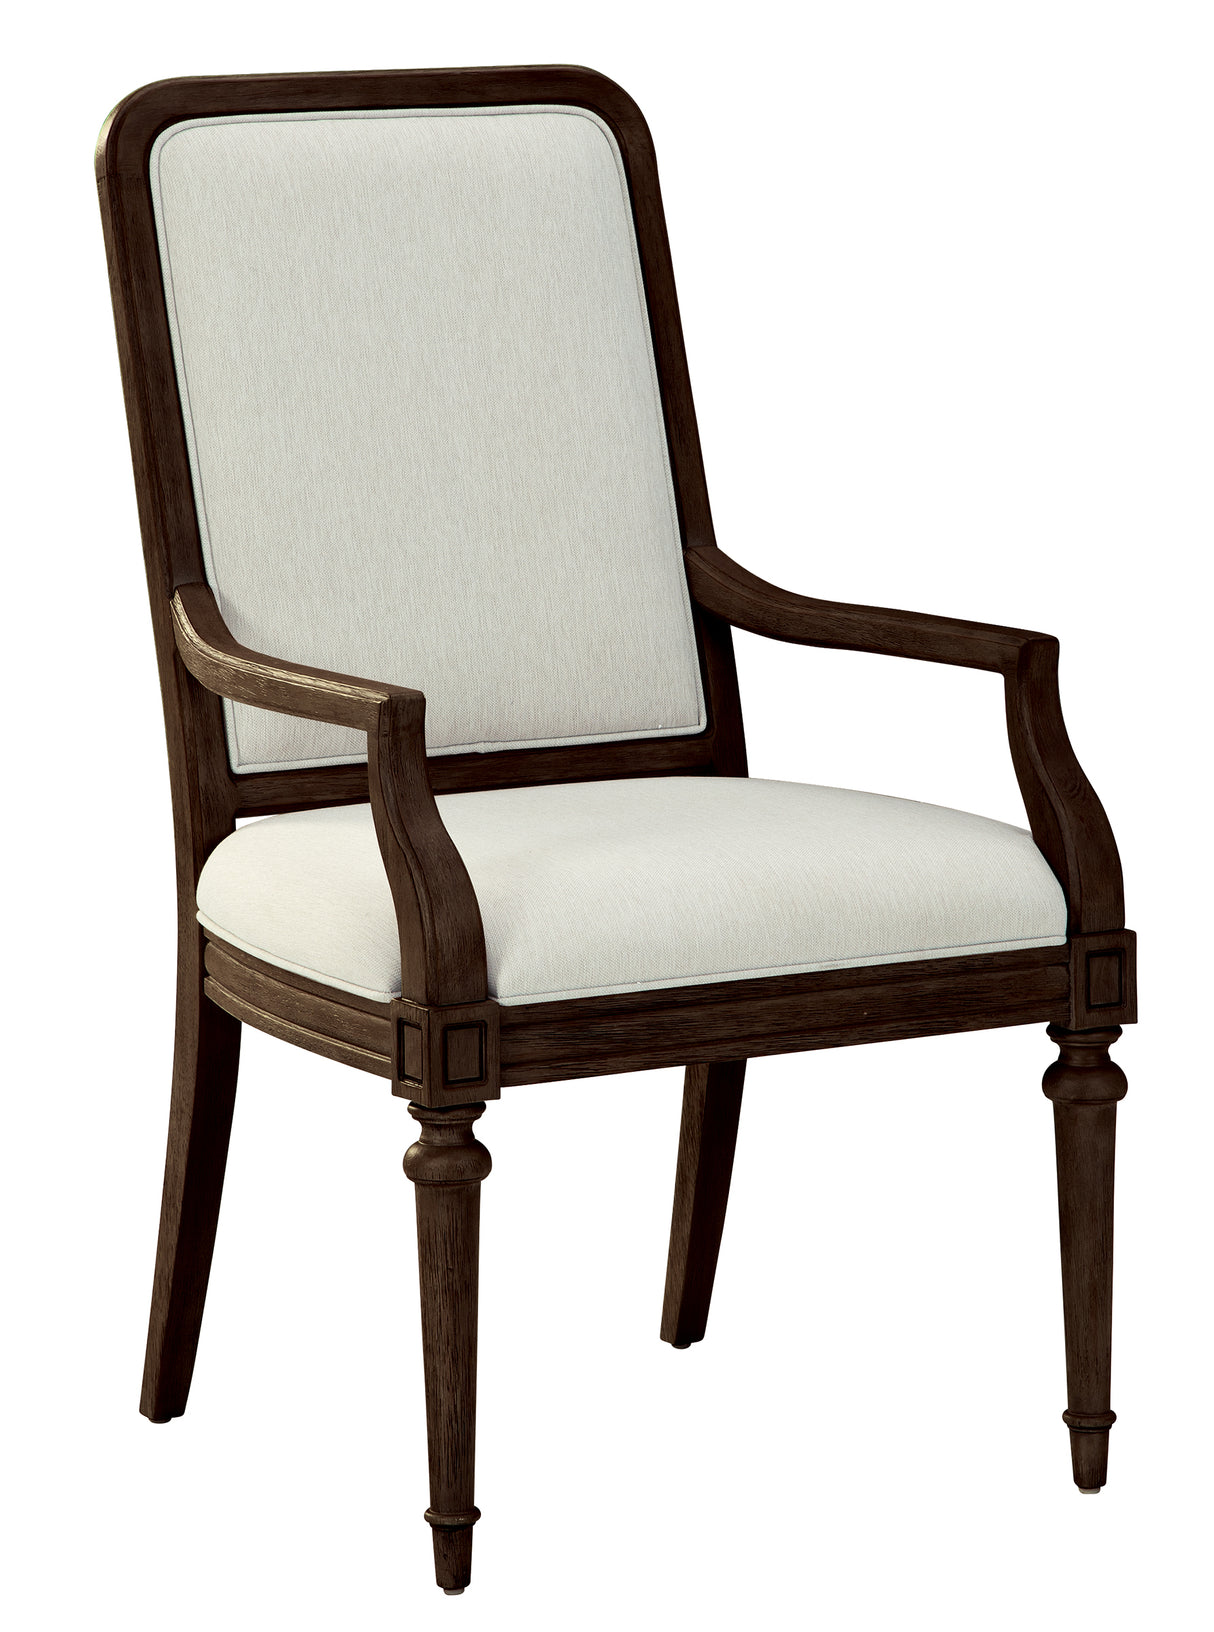 Hekman 25424 Wellington Estates 23.5in. x 25.75in. x 42in. Upholstered Arm Chair